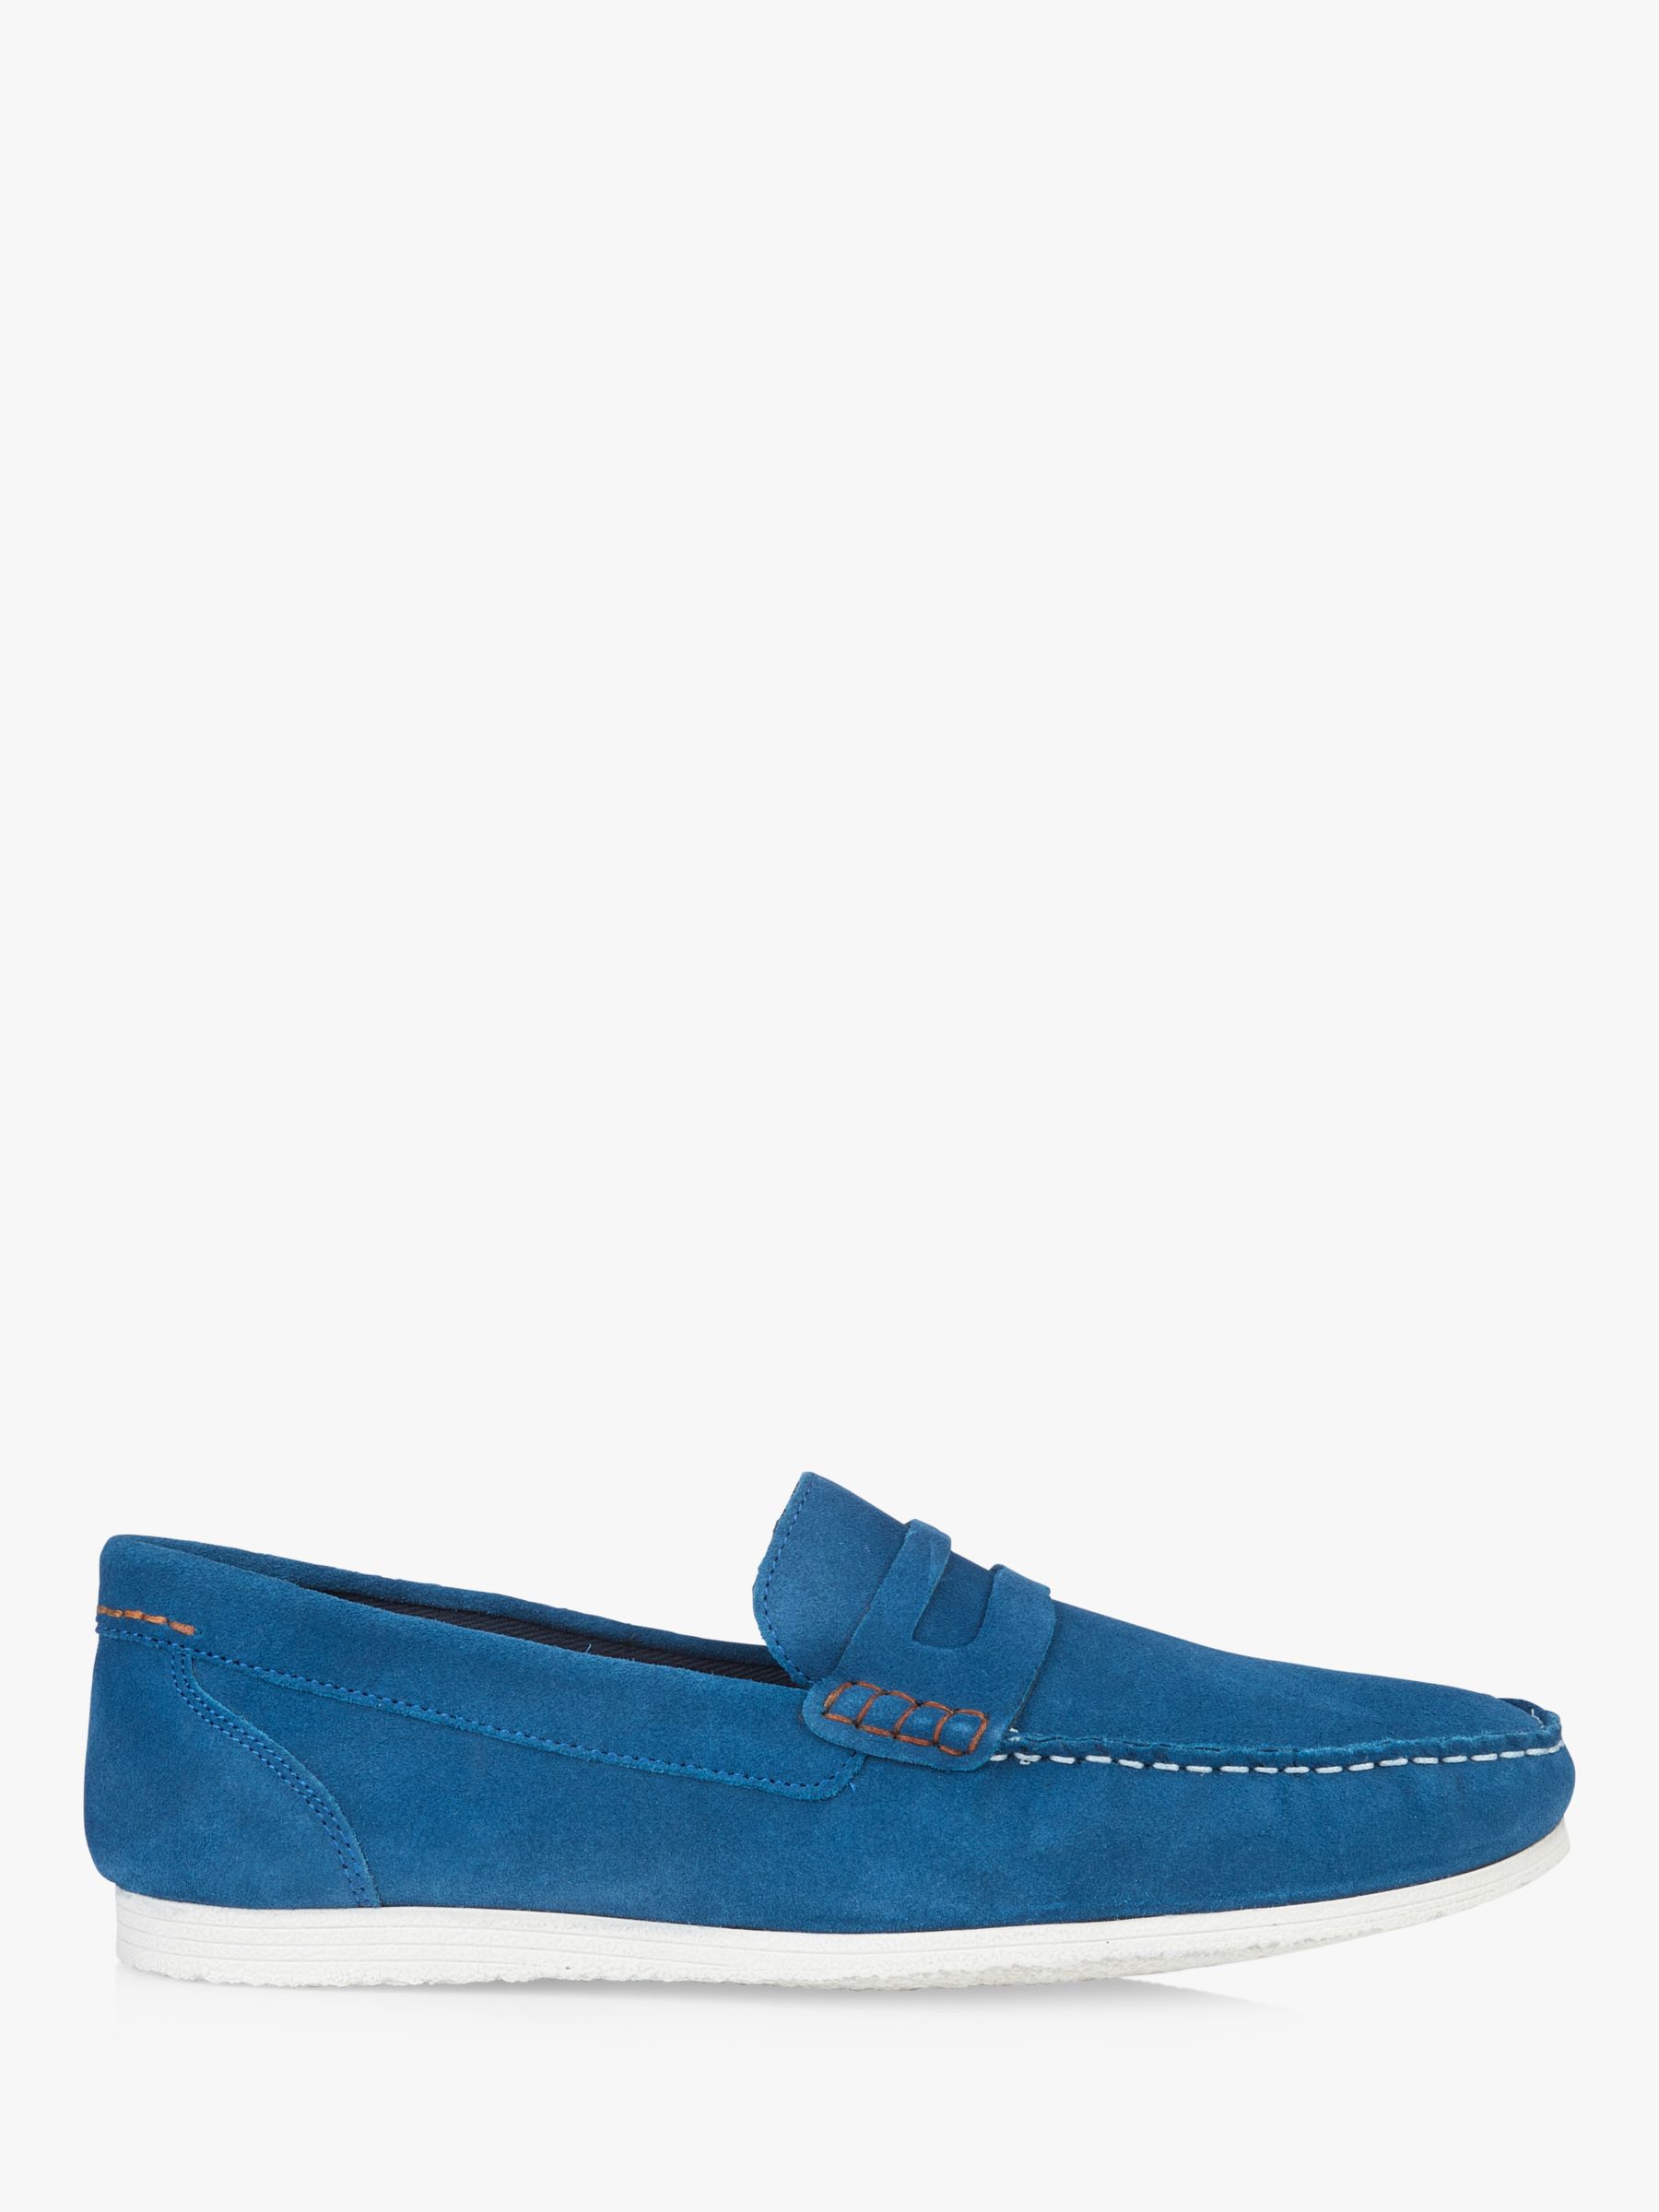 Silver Street London Stanhope Suede Loafers, Victoria Blue, 7